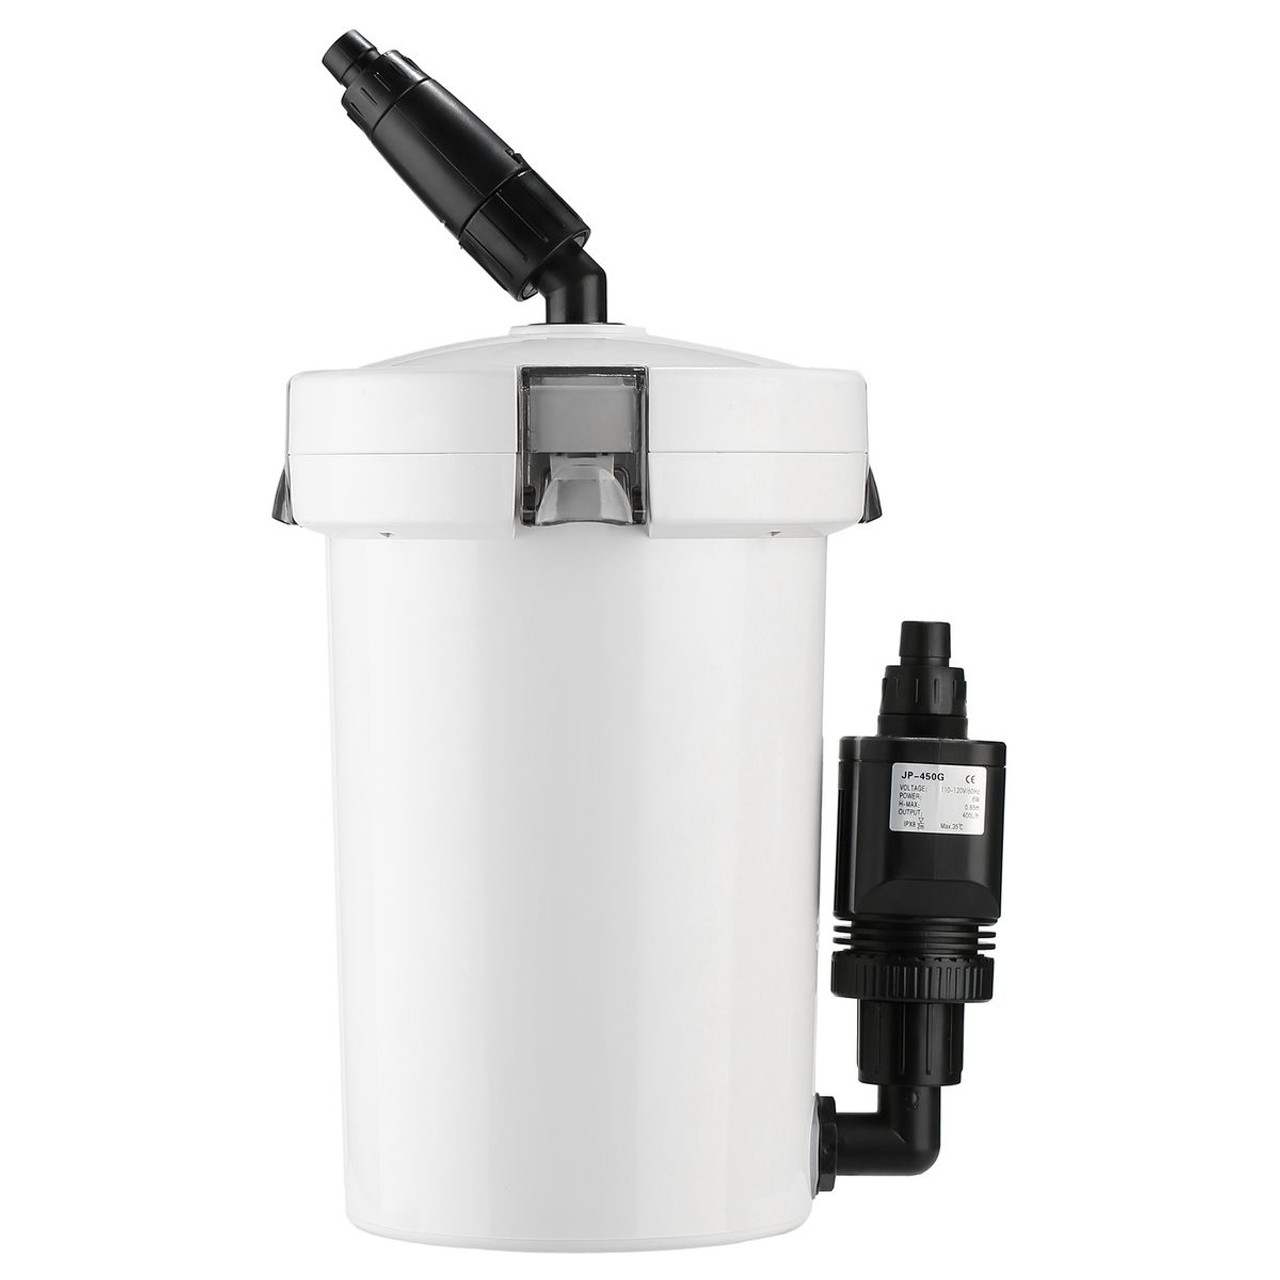 iMounTEK Aquarium 3-Stage Canister Filter product image